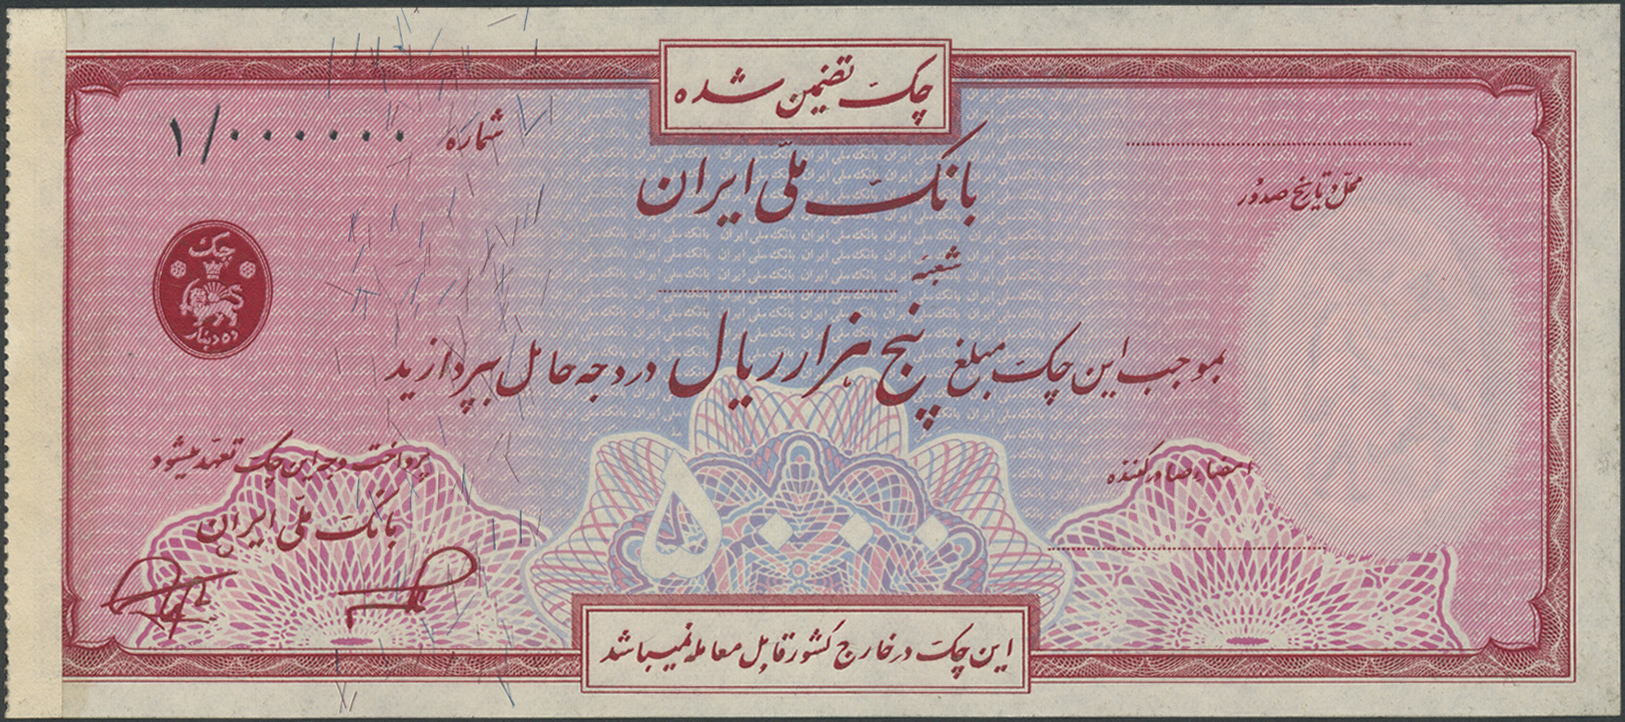 01217 Iran: Cheque Issue With Value Of 5000 Rials ND, Remainder, Unsigned And Unnumbered, Uniface Printed, Mounted On Bl - Iran